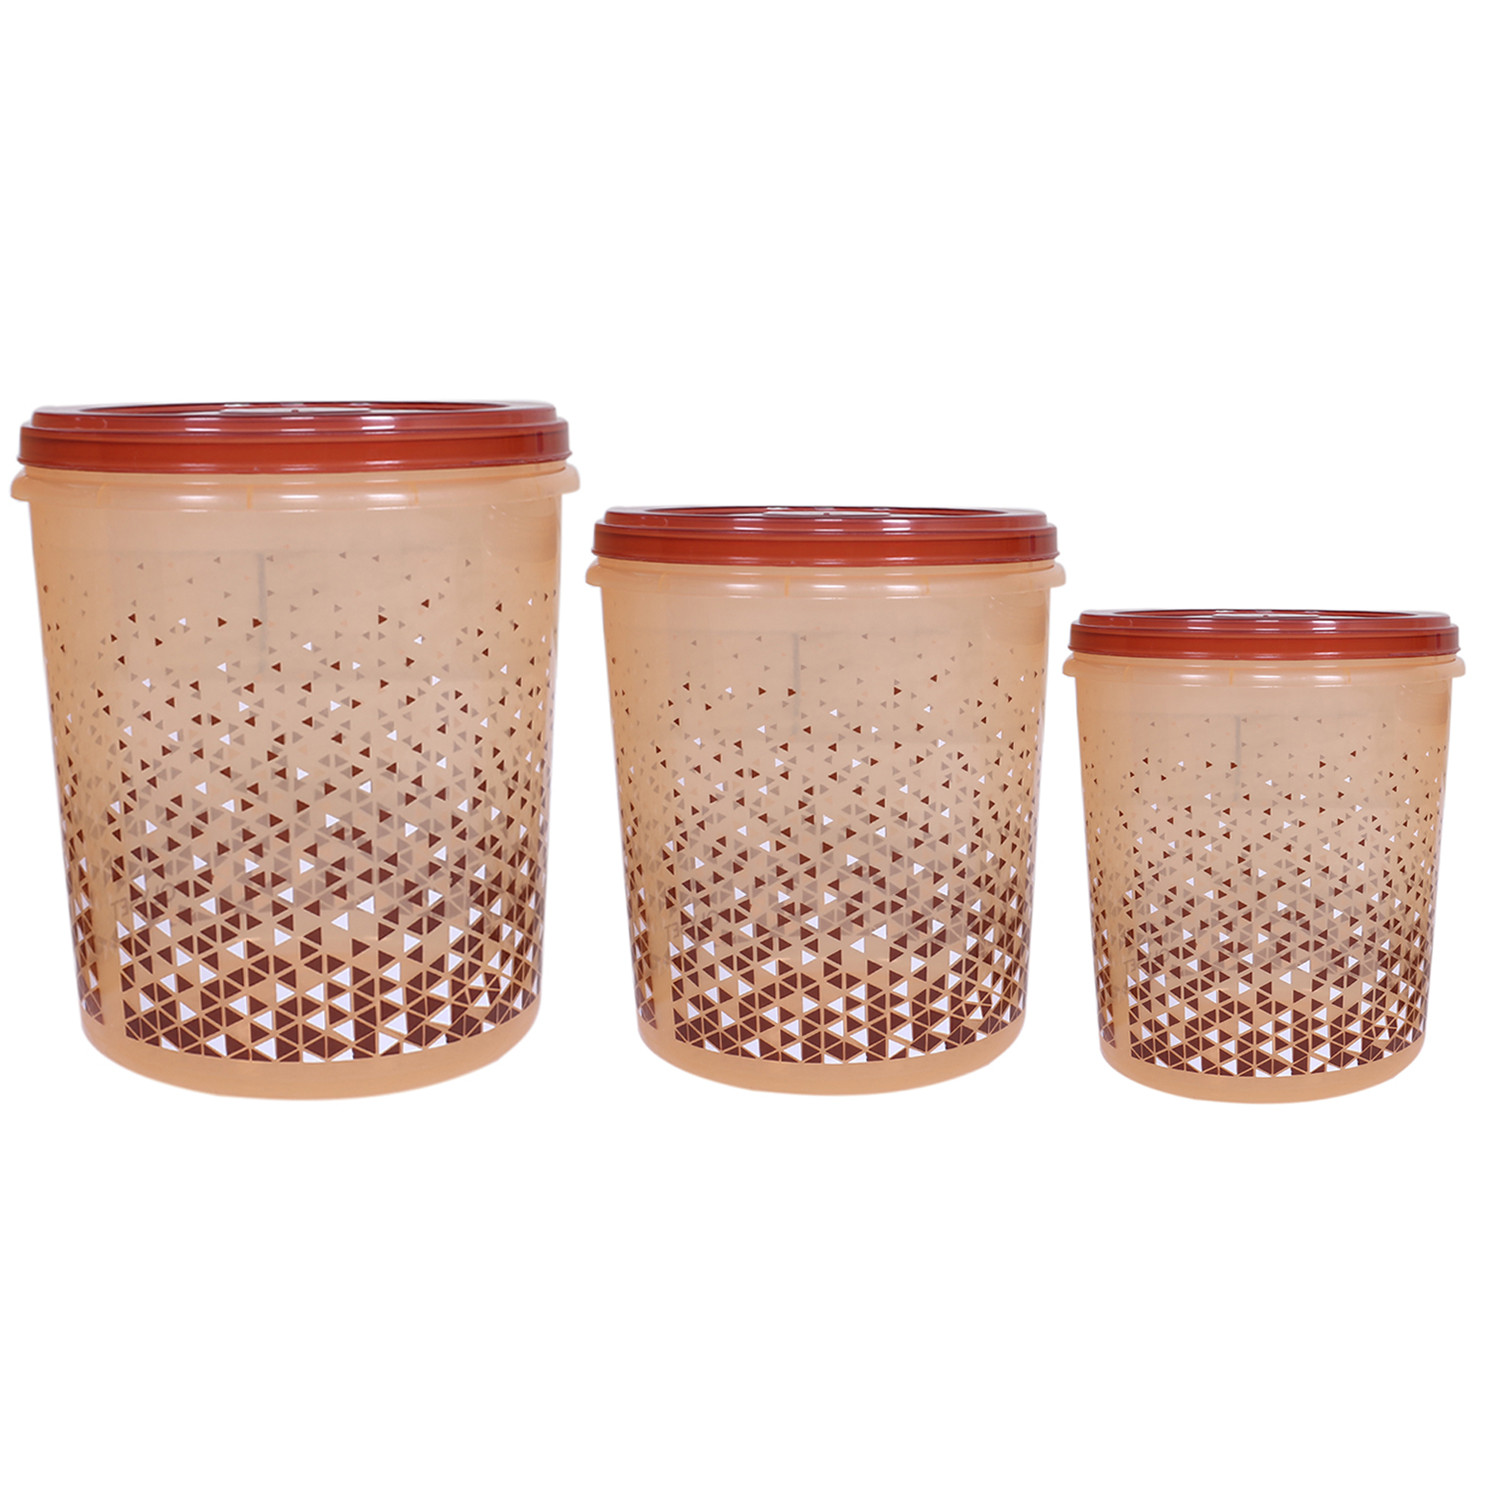 Kuber Industries Plastic Container|Container For Kitchen Storage Set|Air Tight Container|Tinted Printed 5 Litre,7 Litre,10 Litre Containers|Set of 3 (Brown)